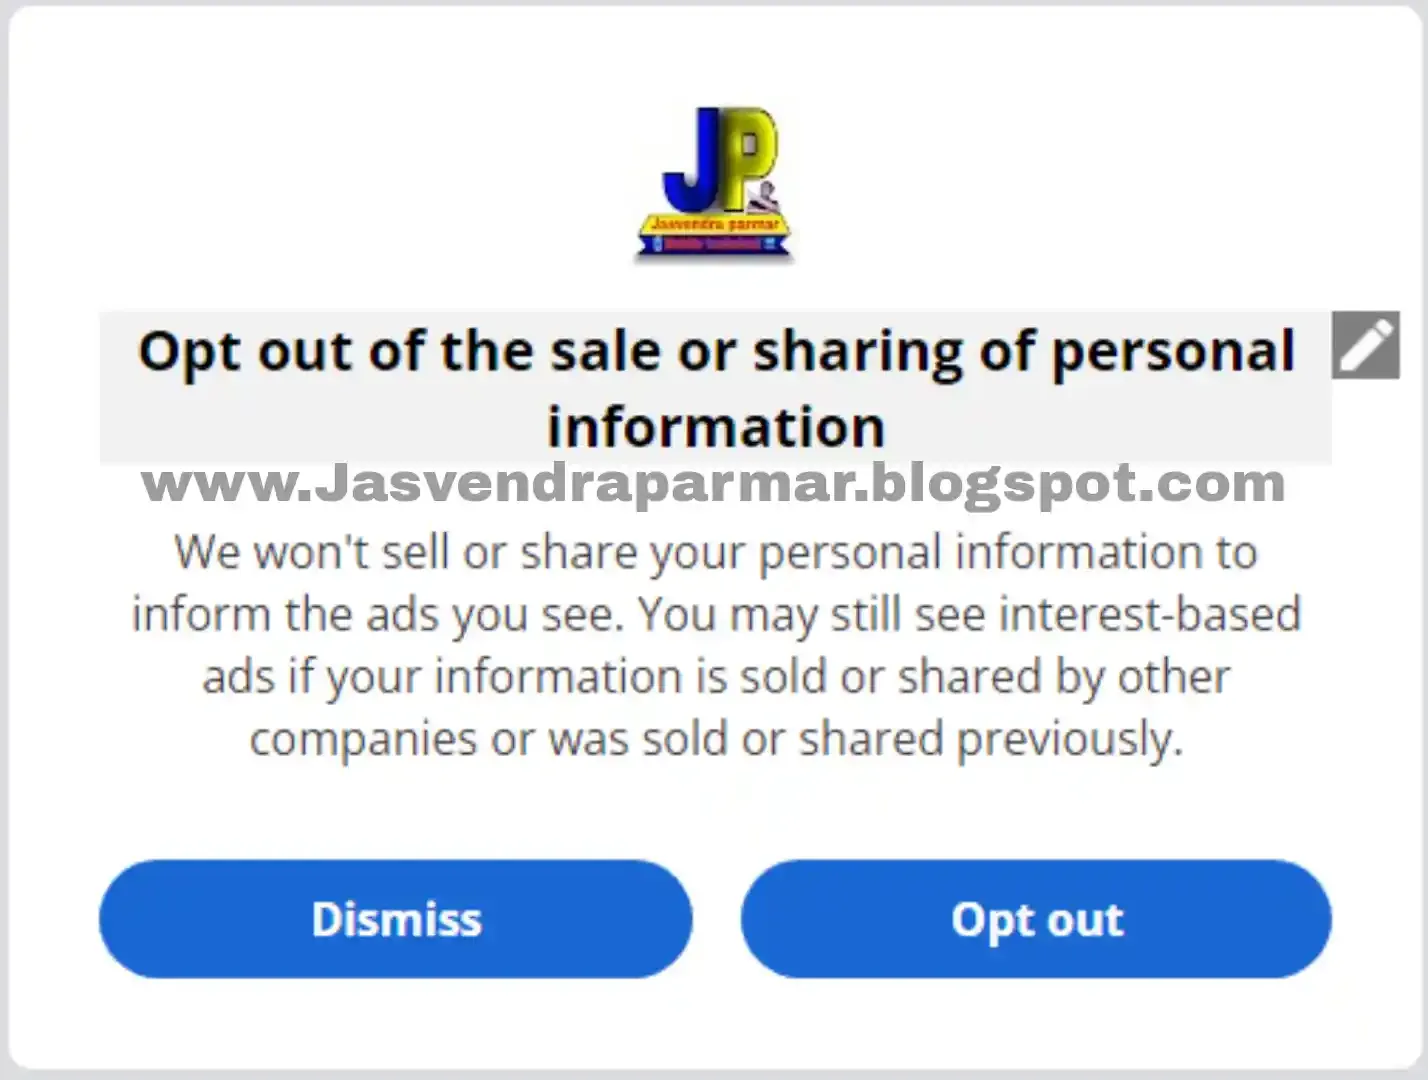 Opt out of the sale or sharing of personal information